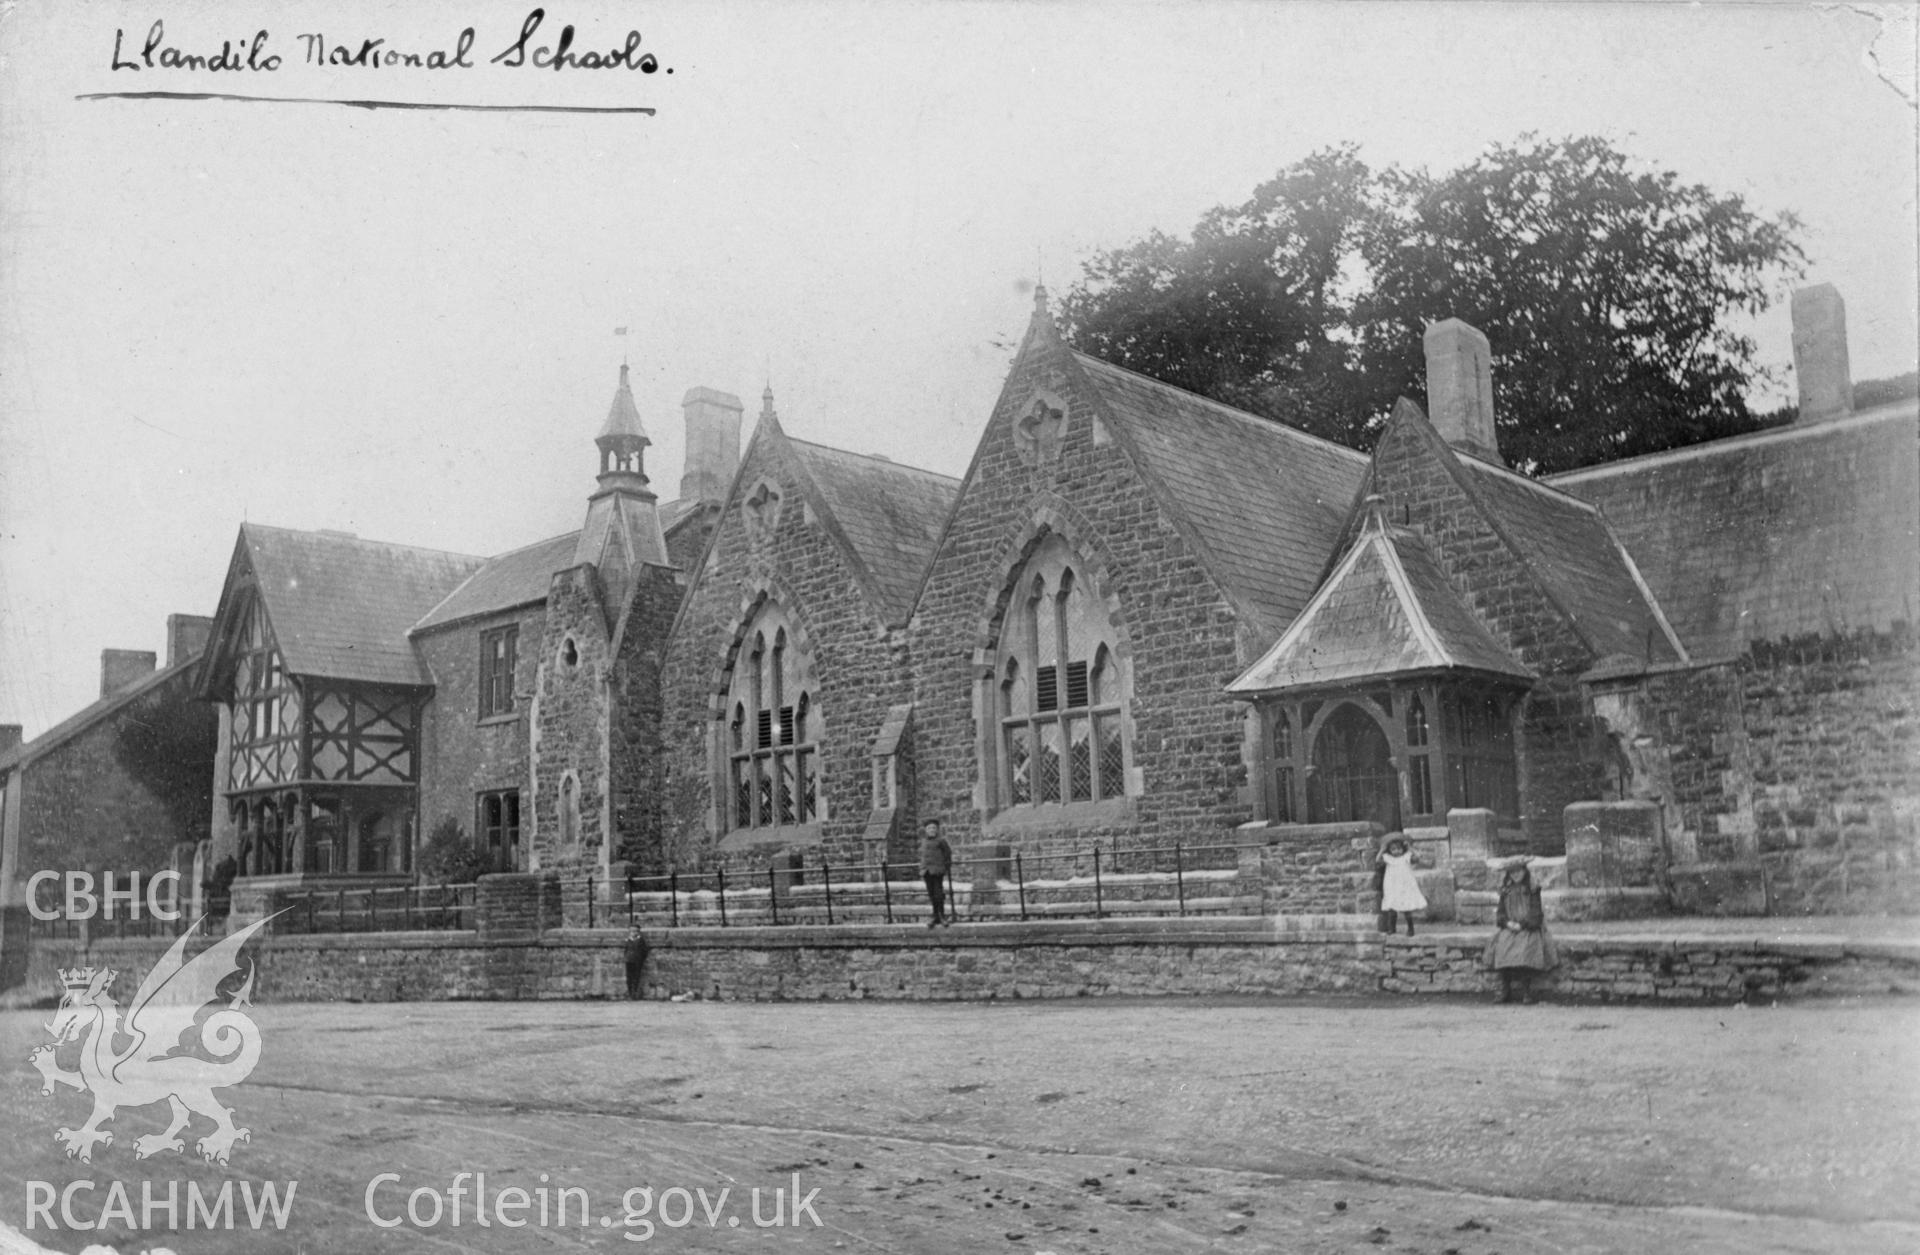 National School, Llandeilo; b&w photograph copied from a postcard dated August 1906, loaned for copying by Thomas Lloyd.